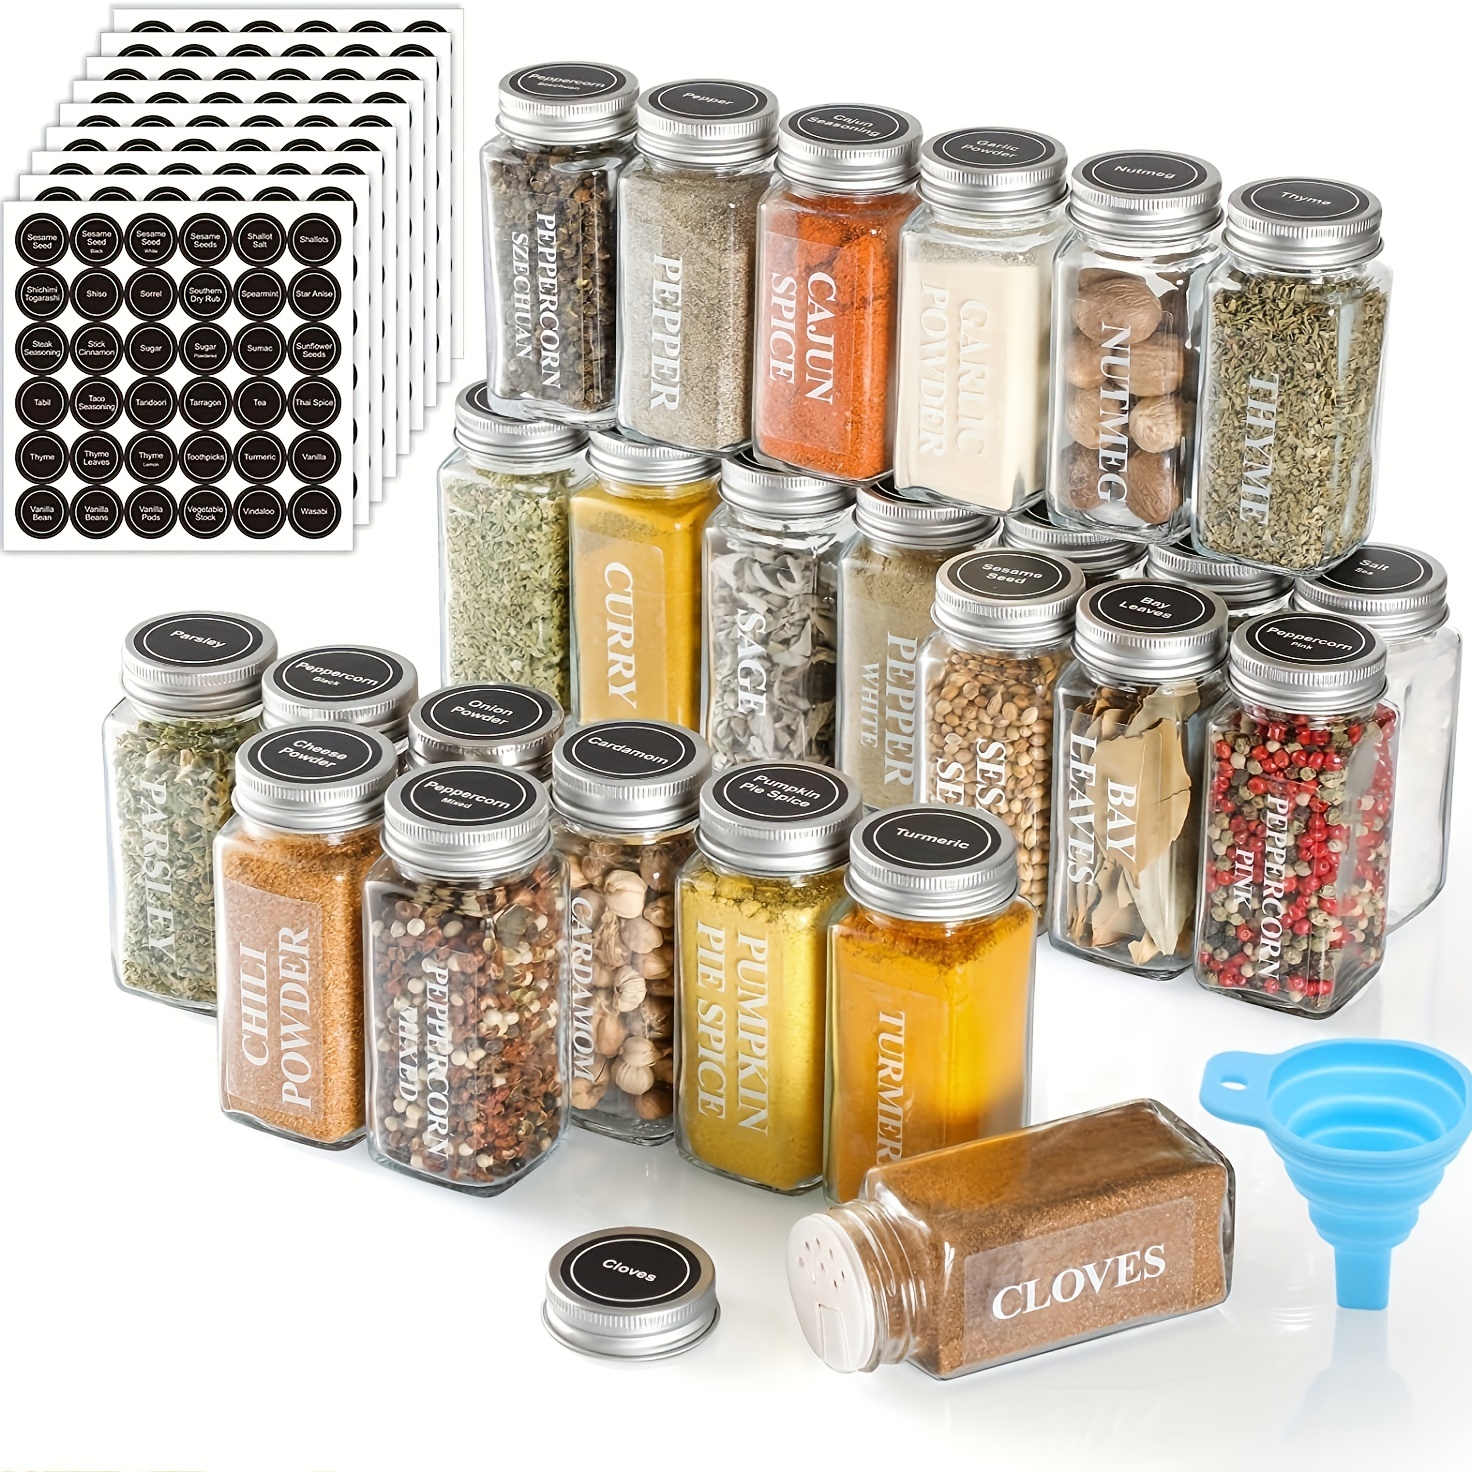 136pcs Spice Labels - Clear Spice Jar Labels Preprinted for Seasoning Herbs  Kitchen Spice Rack Organization, Water Resistant Stickers, Black and White  Script